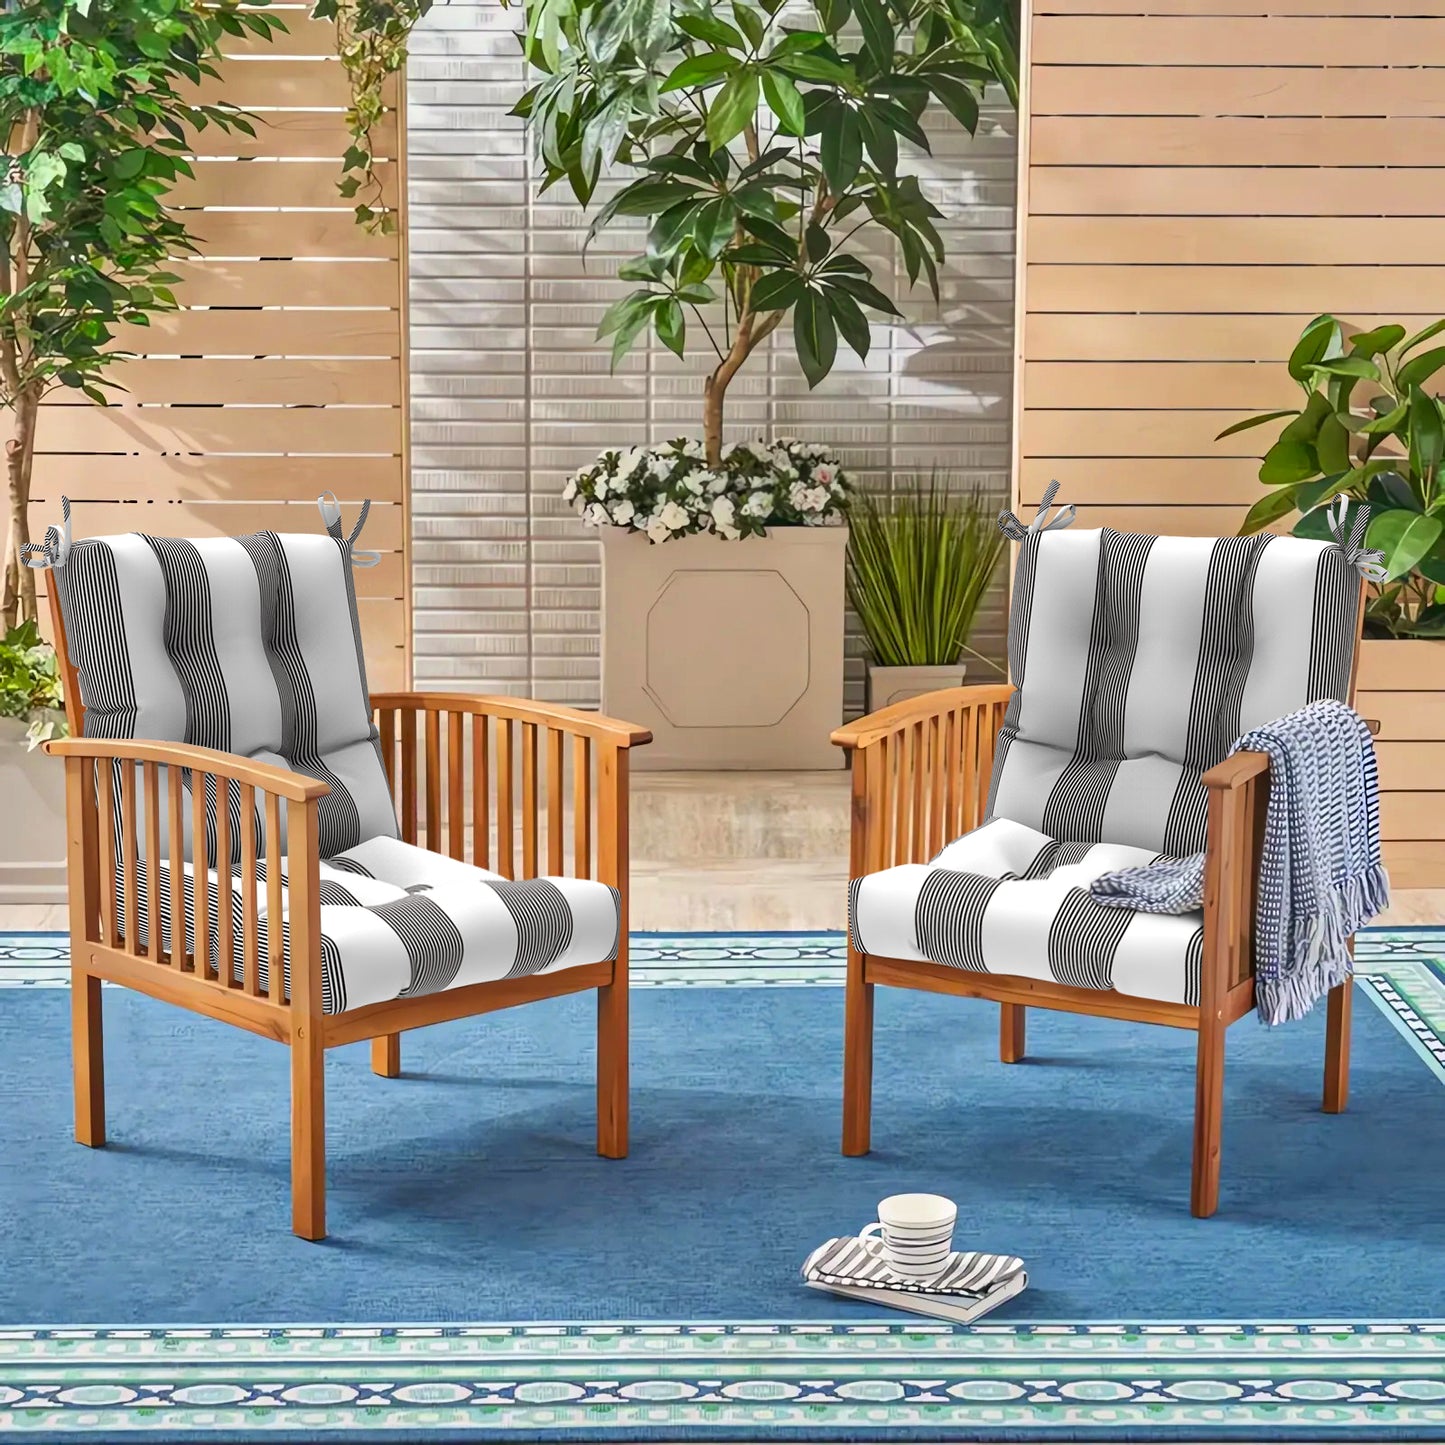 Melody Elephant Indoor/Outdoor Square Tufted Seat Cushions with Ties, Fade Resistant Patio Wicker Thick Chair Pads Pack of 2, 19 x 19 x 5 Inch, Stripe Cabana Black